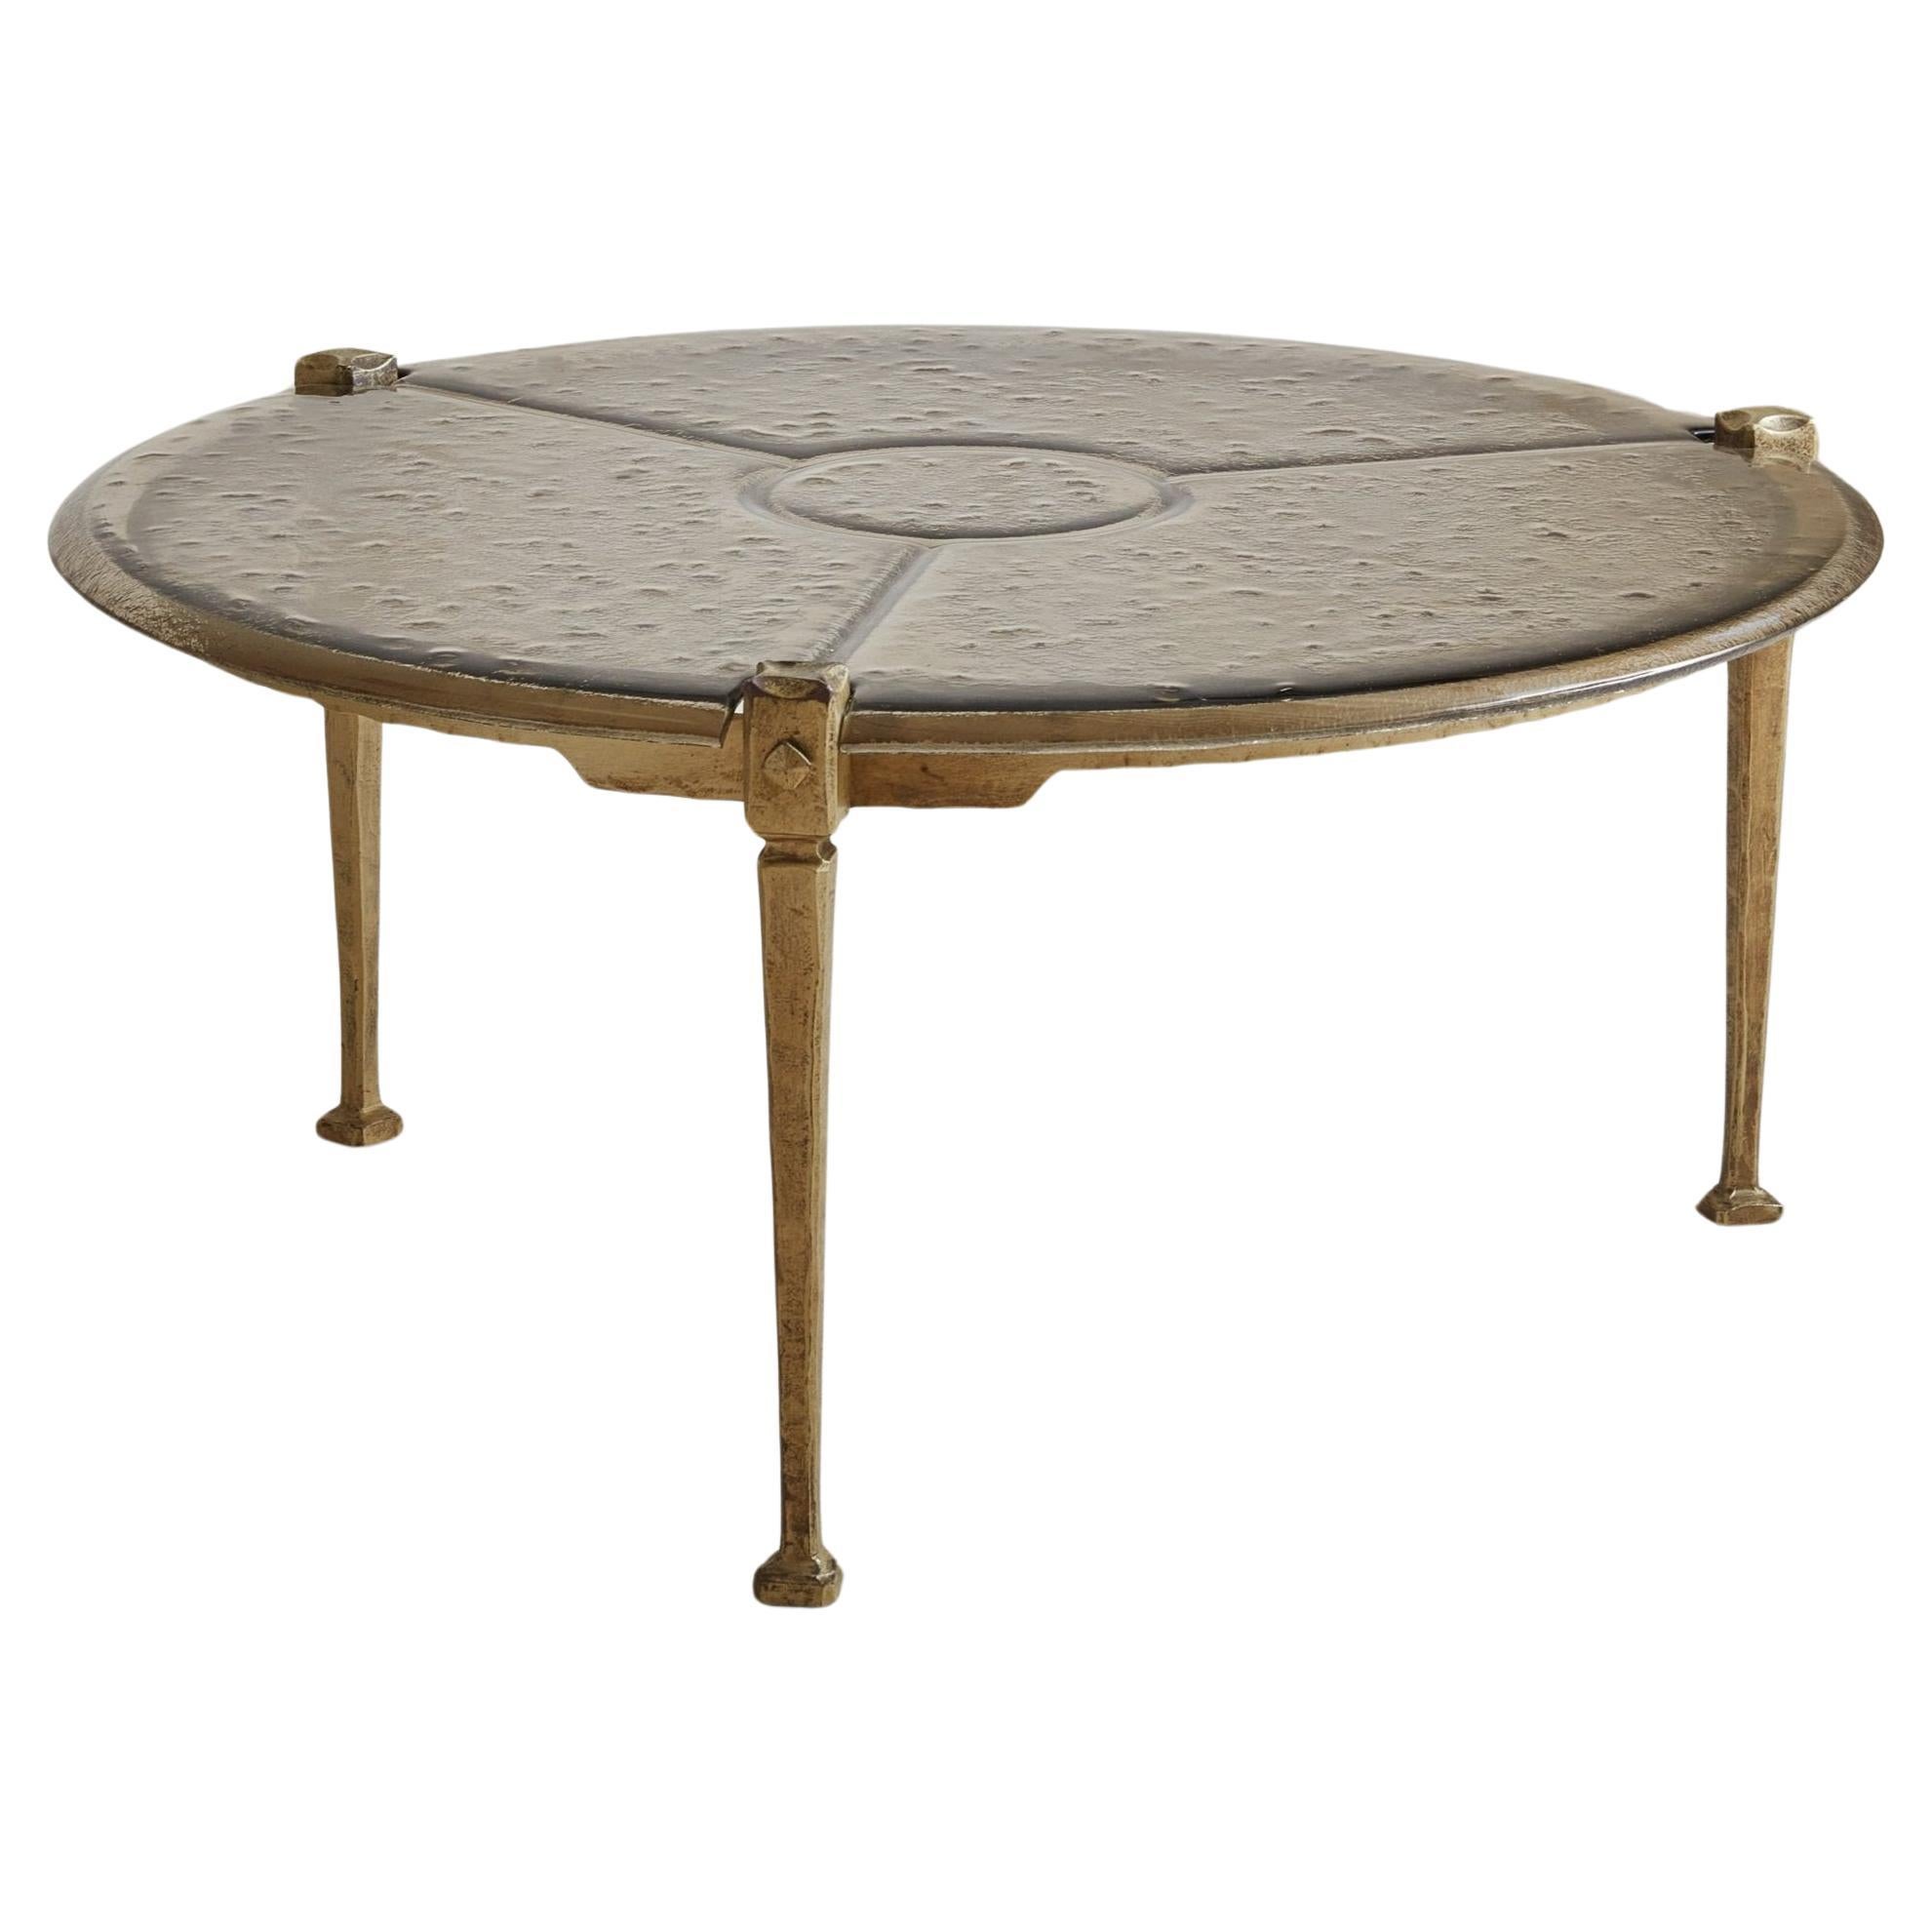 Bronze + Glass Top Round Coffee Table by Lothar Klute, Germany 1980s